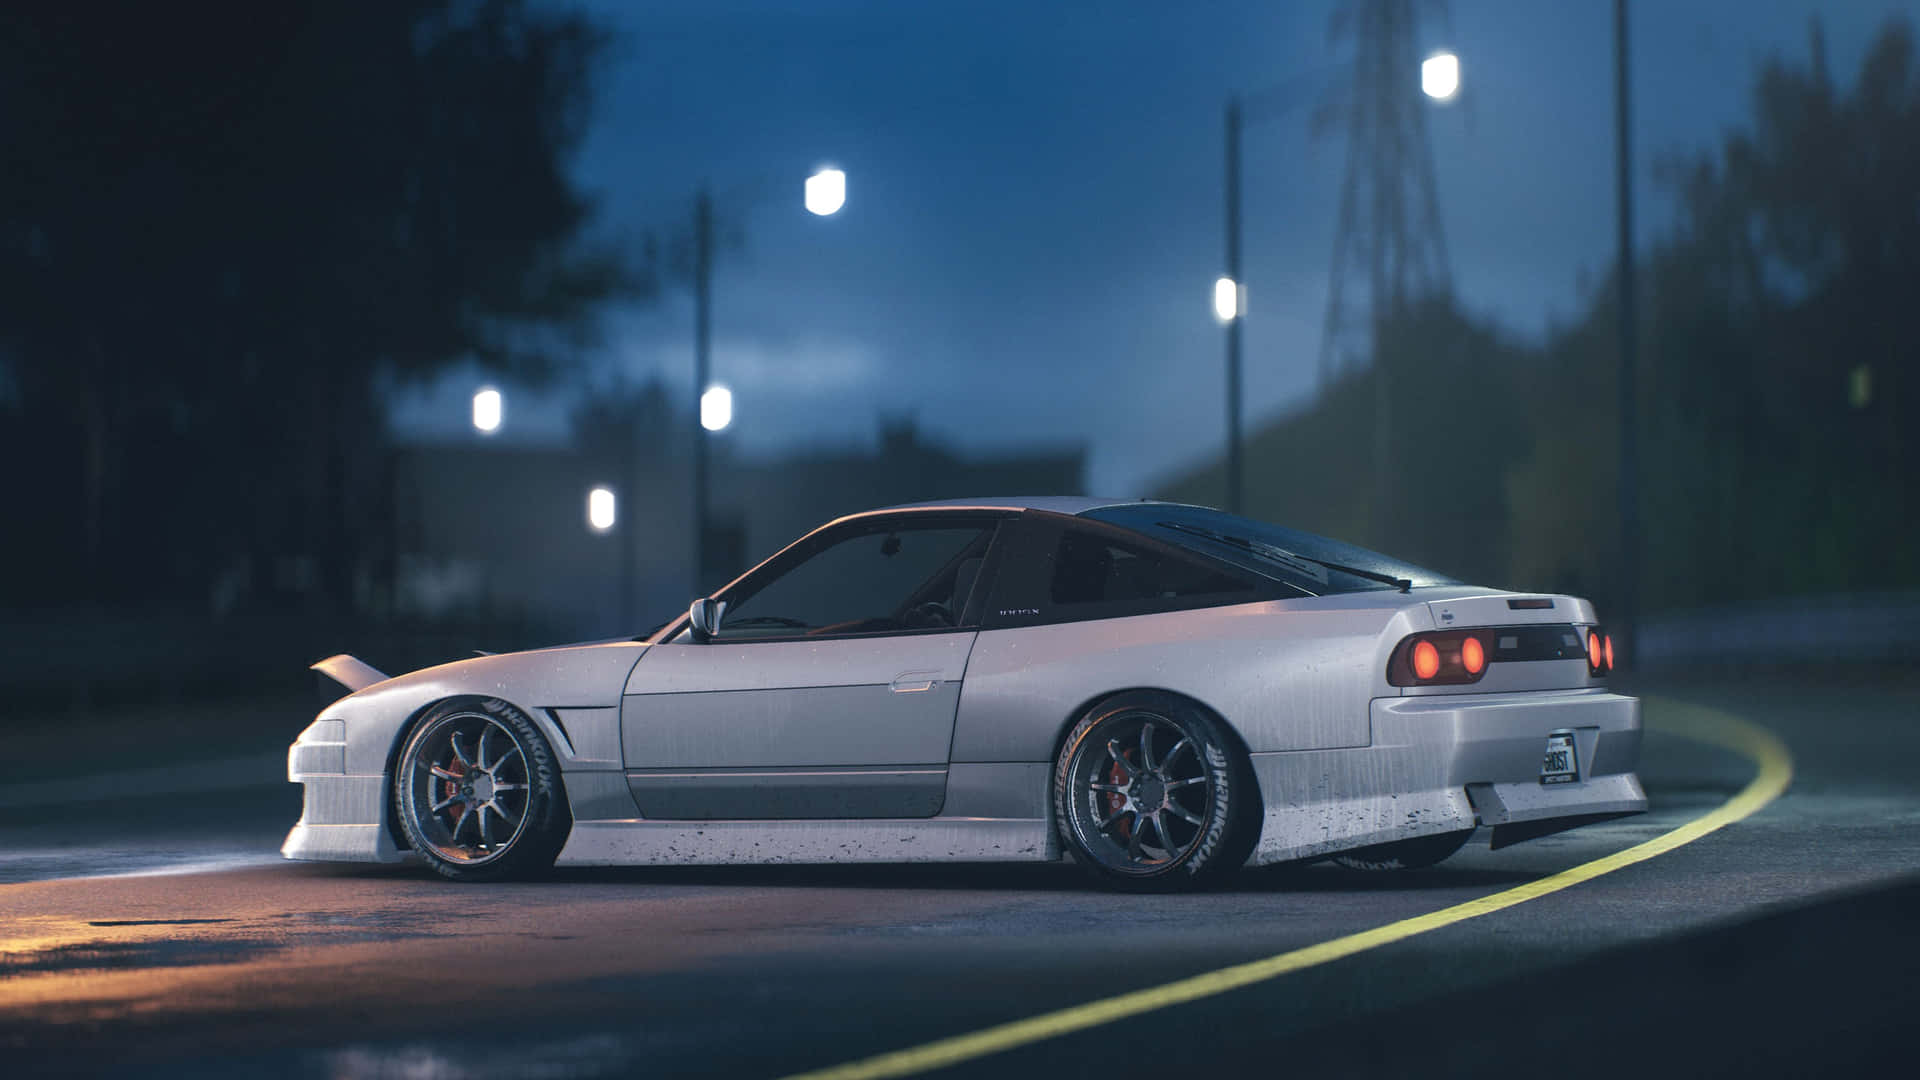 Enjoy the Road in the Striking Nissan Silvia S13 Wallpaper